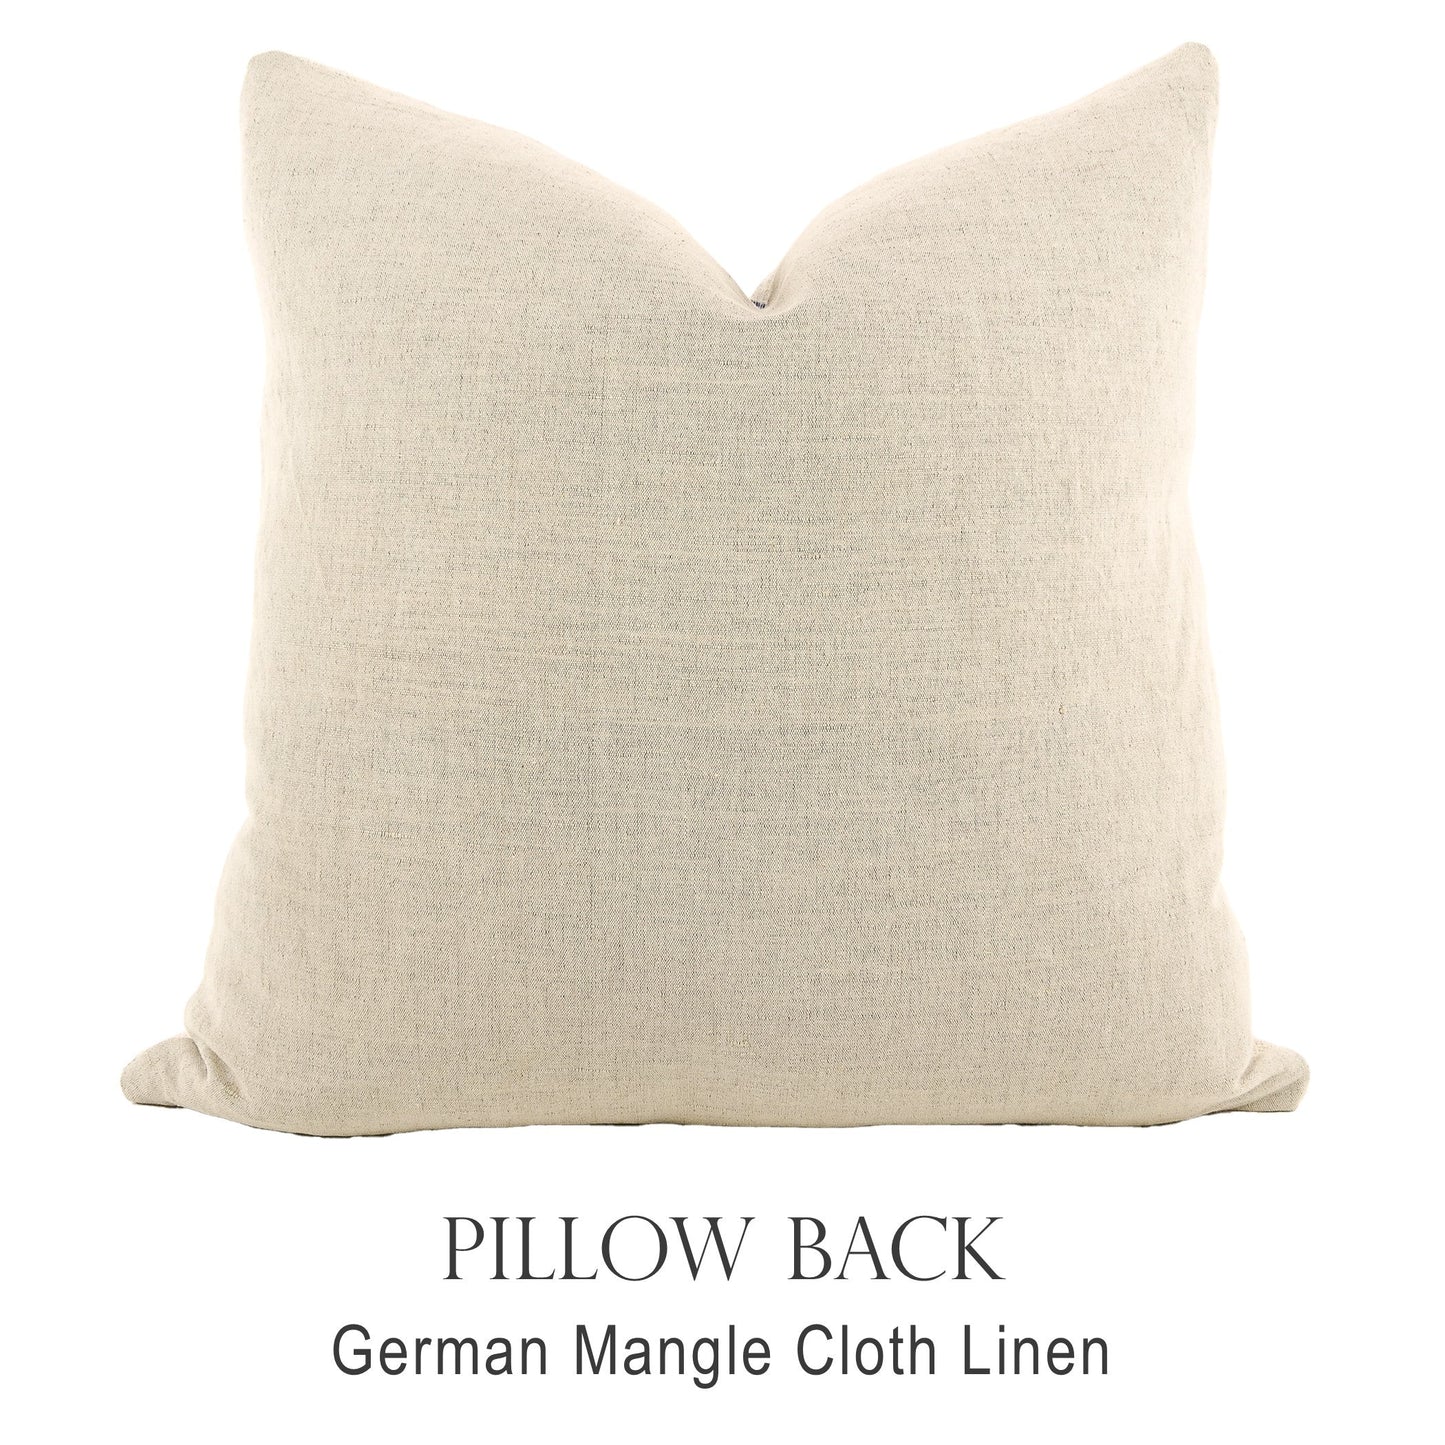 Back of pillow made from vintage German mangle cloth linen